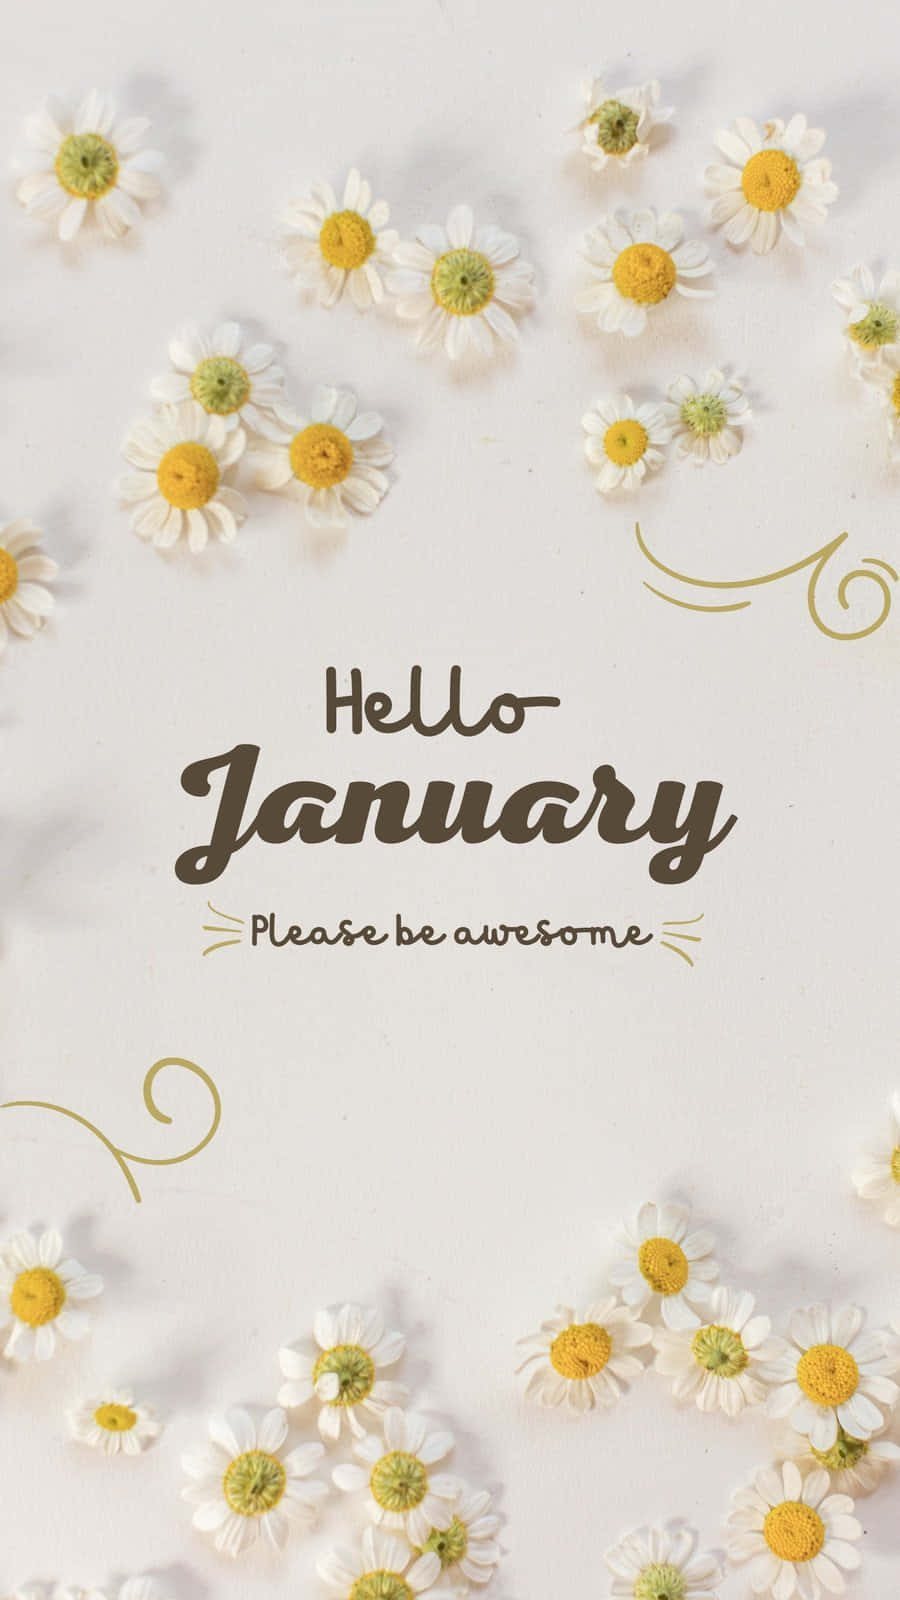 "Make the most of January"